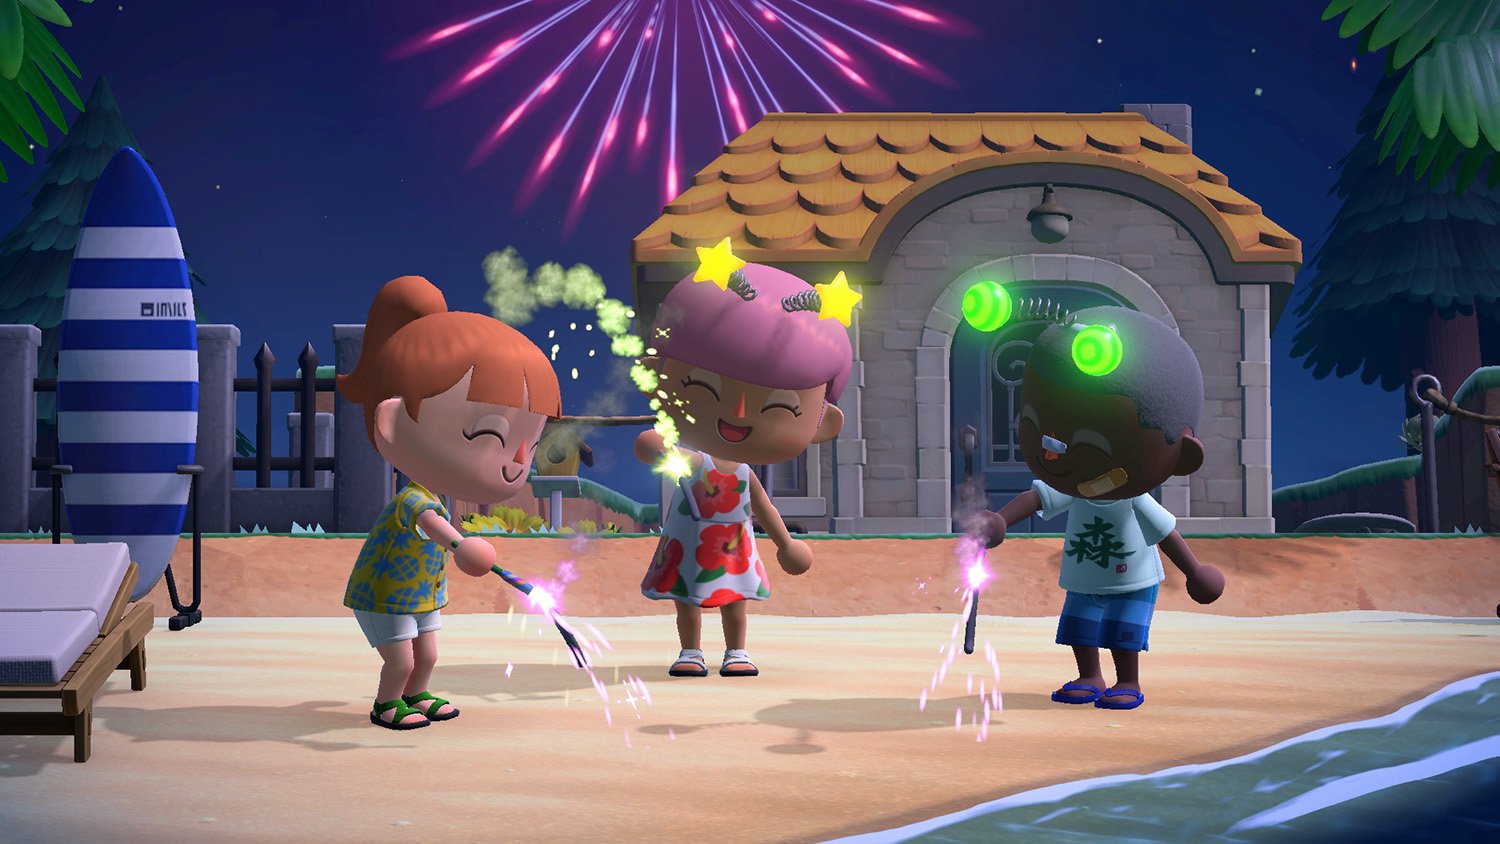 Does ‘Animal Crossing: New Horizons’ Celebrate the 4th of July?